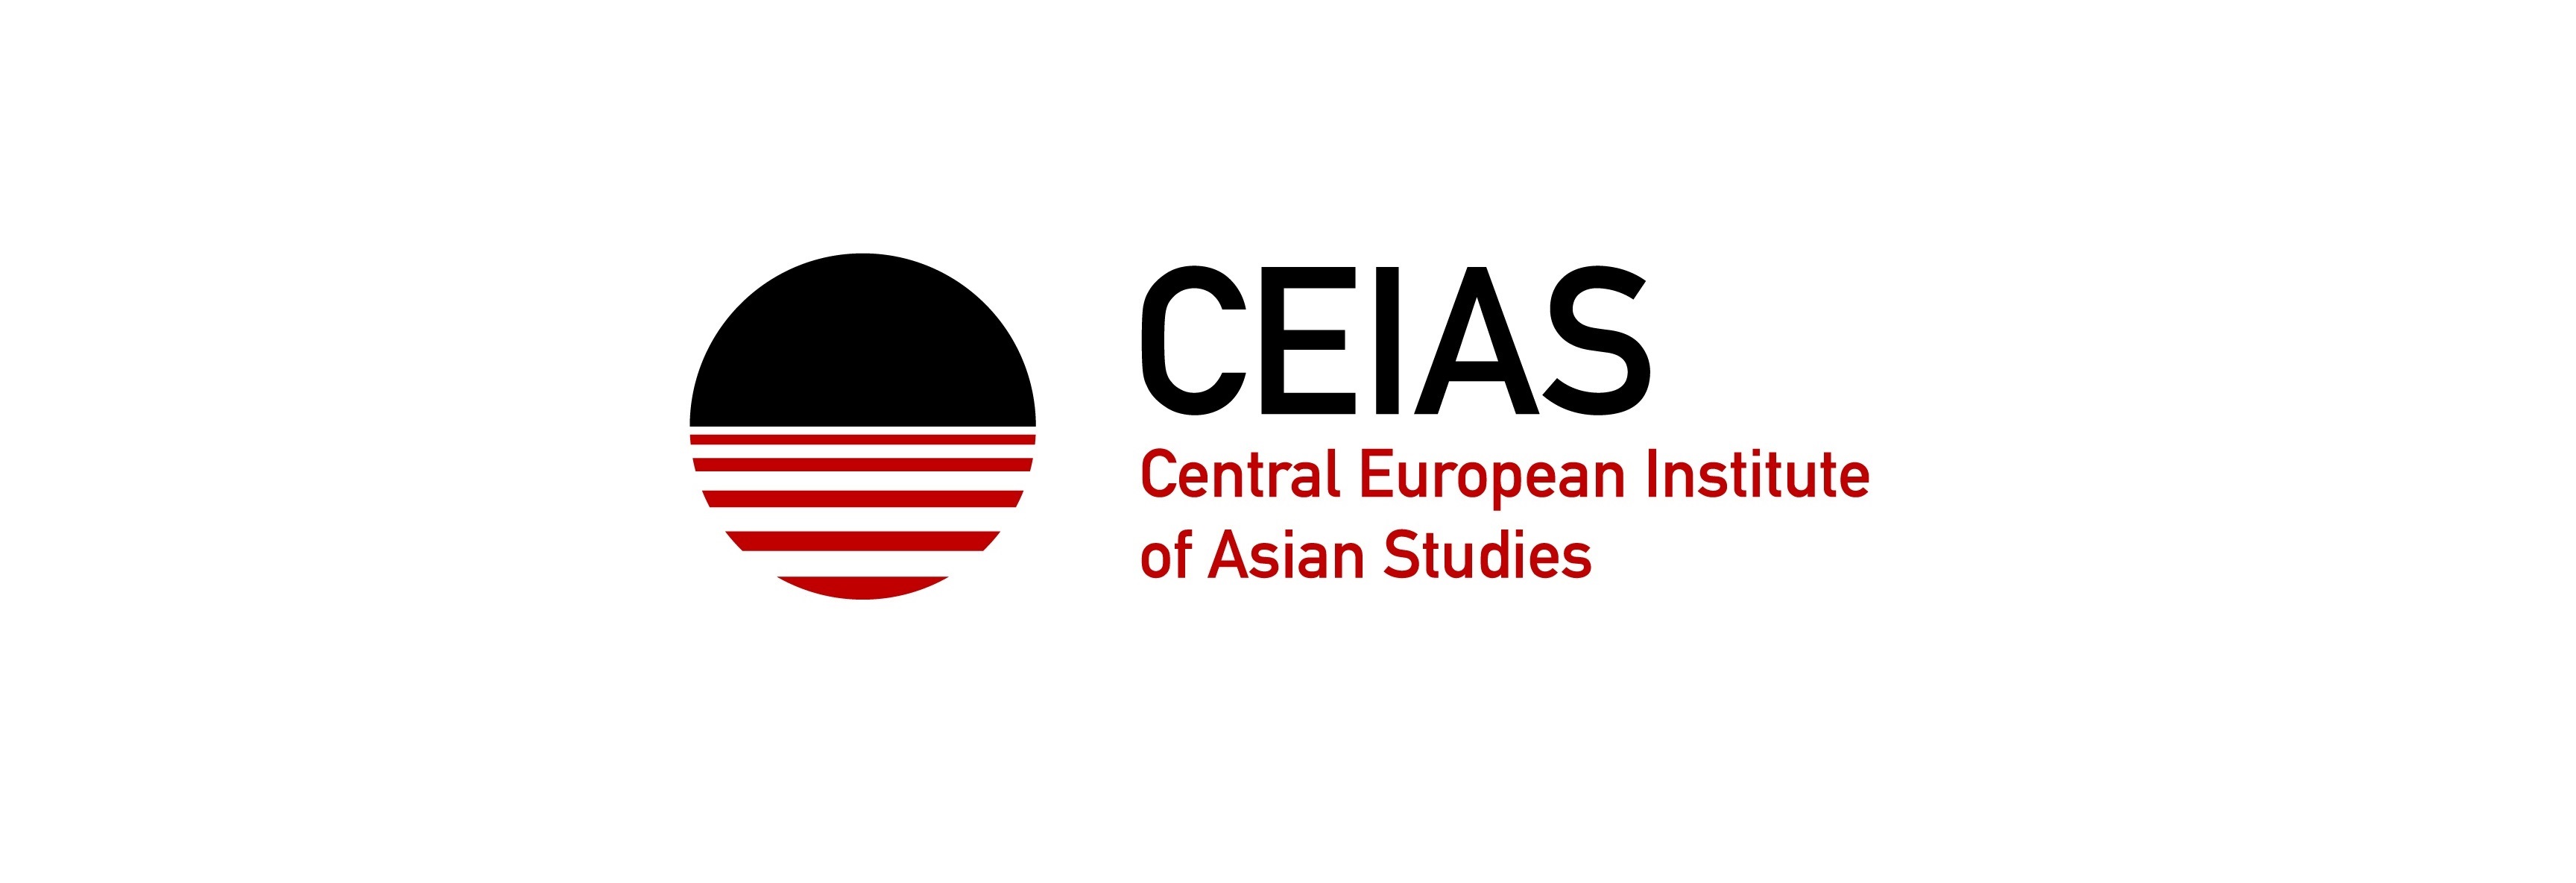 New Asia-related think tank established in Central Europe